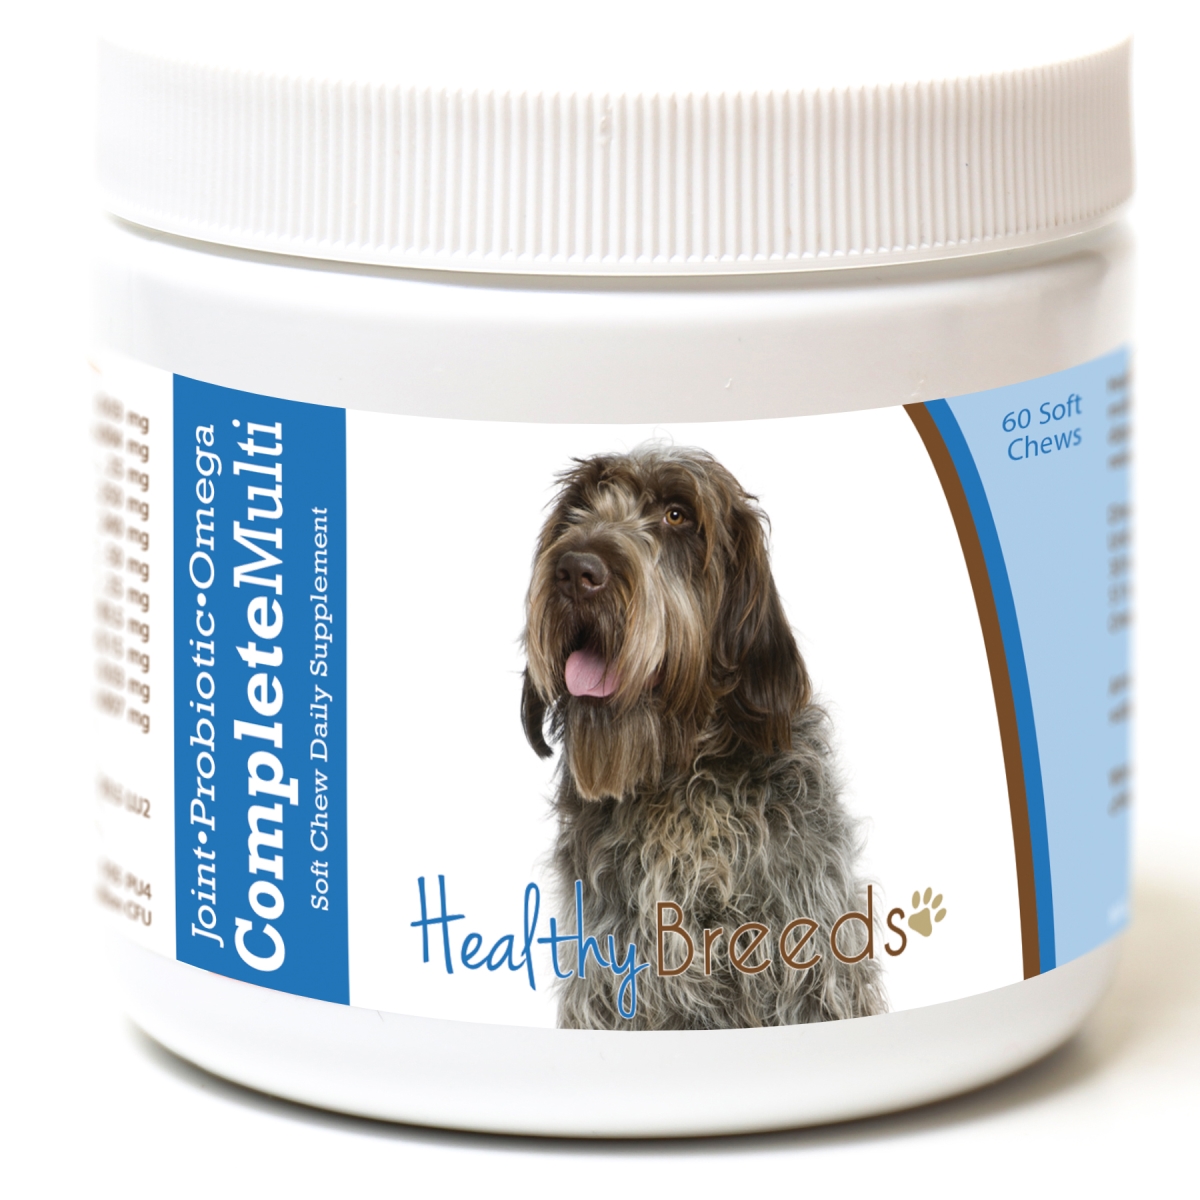 Picture of Healthy Breeds 192959009262 Wirehaired Pointing Griffon all in one Multivitamin Soft Chew - 60 Count